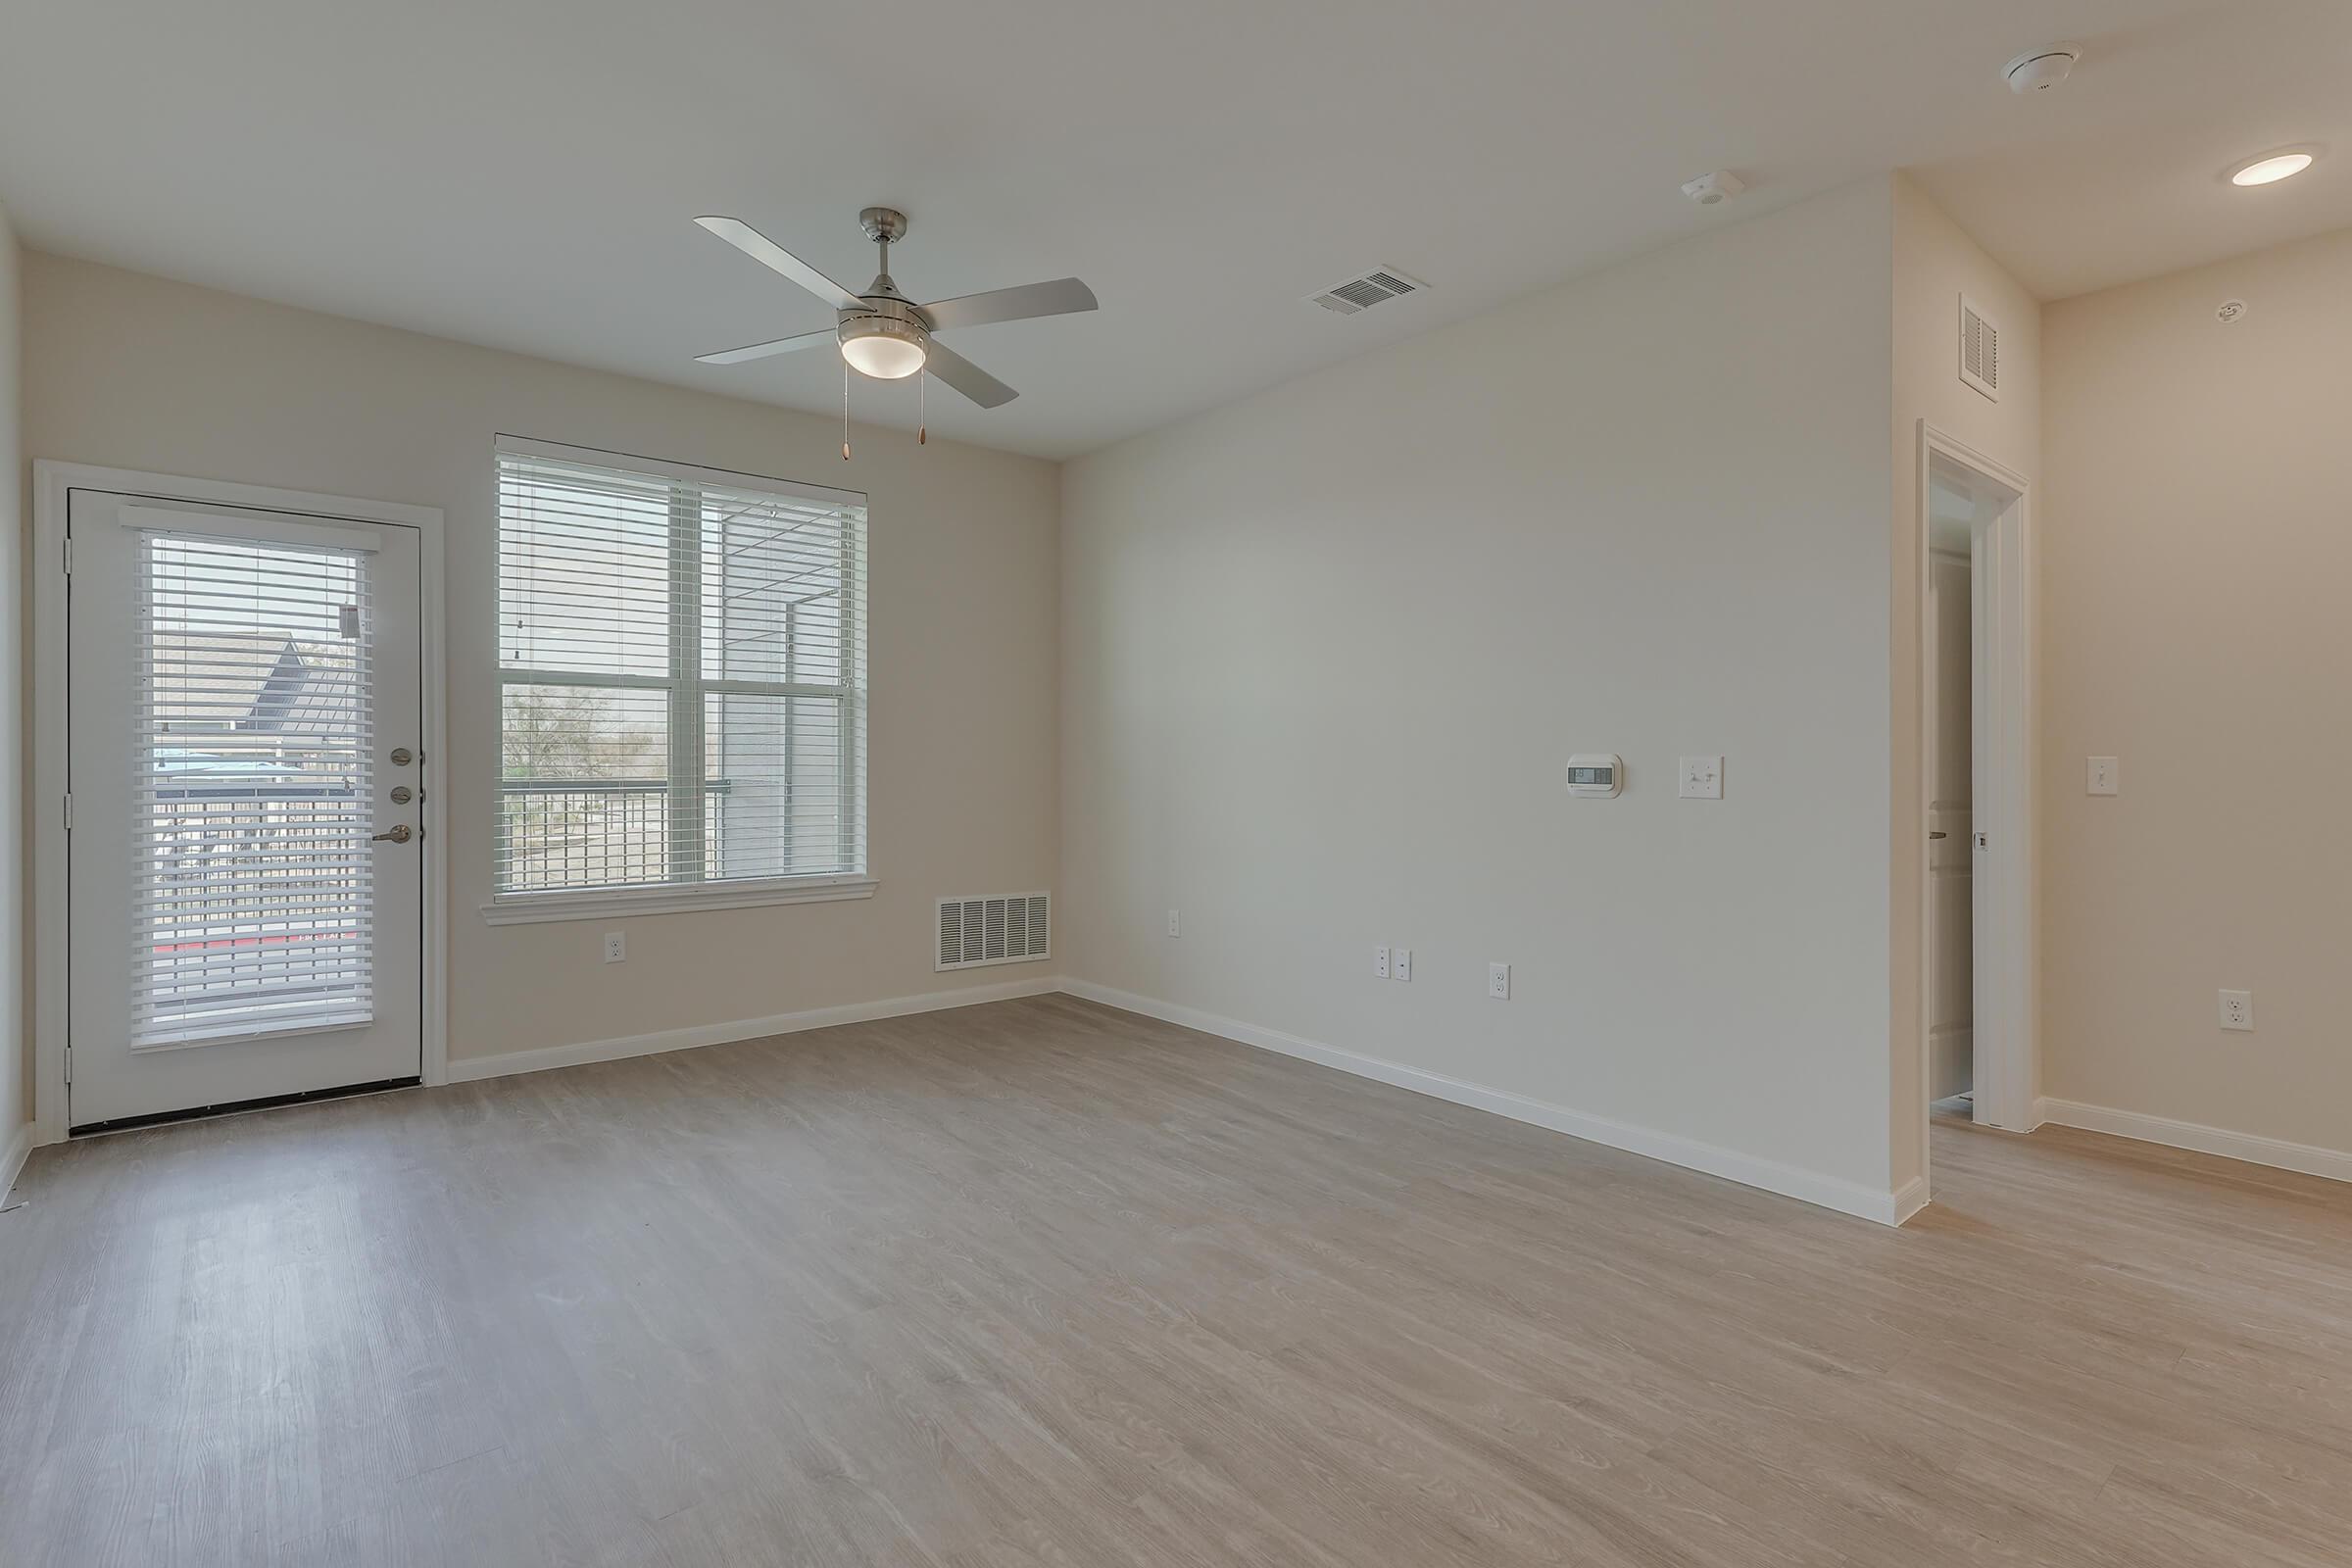 Apartments in Pflugerville TX - Modern Living With Hardwood Flooring and Access to Outdoor Patio